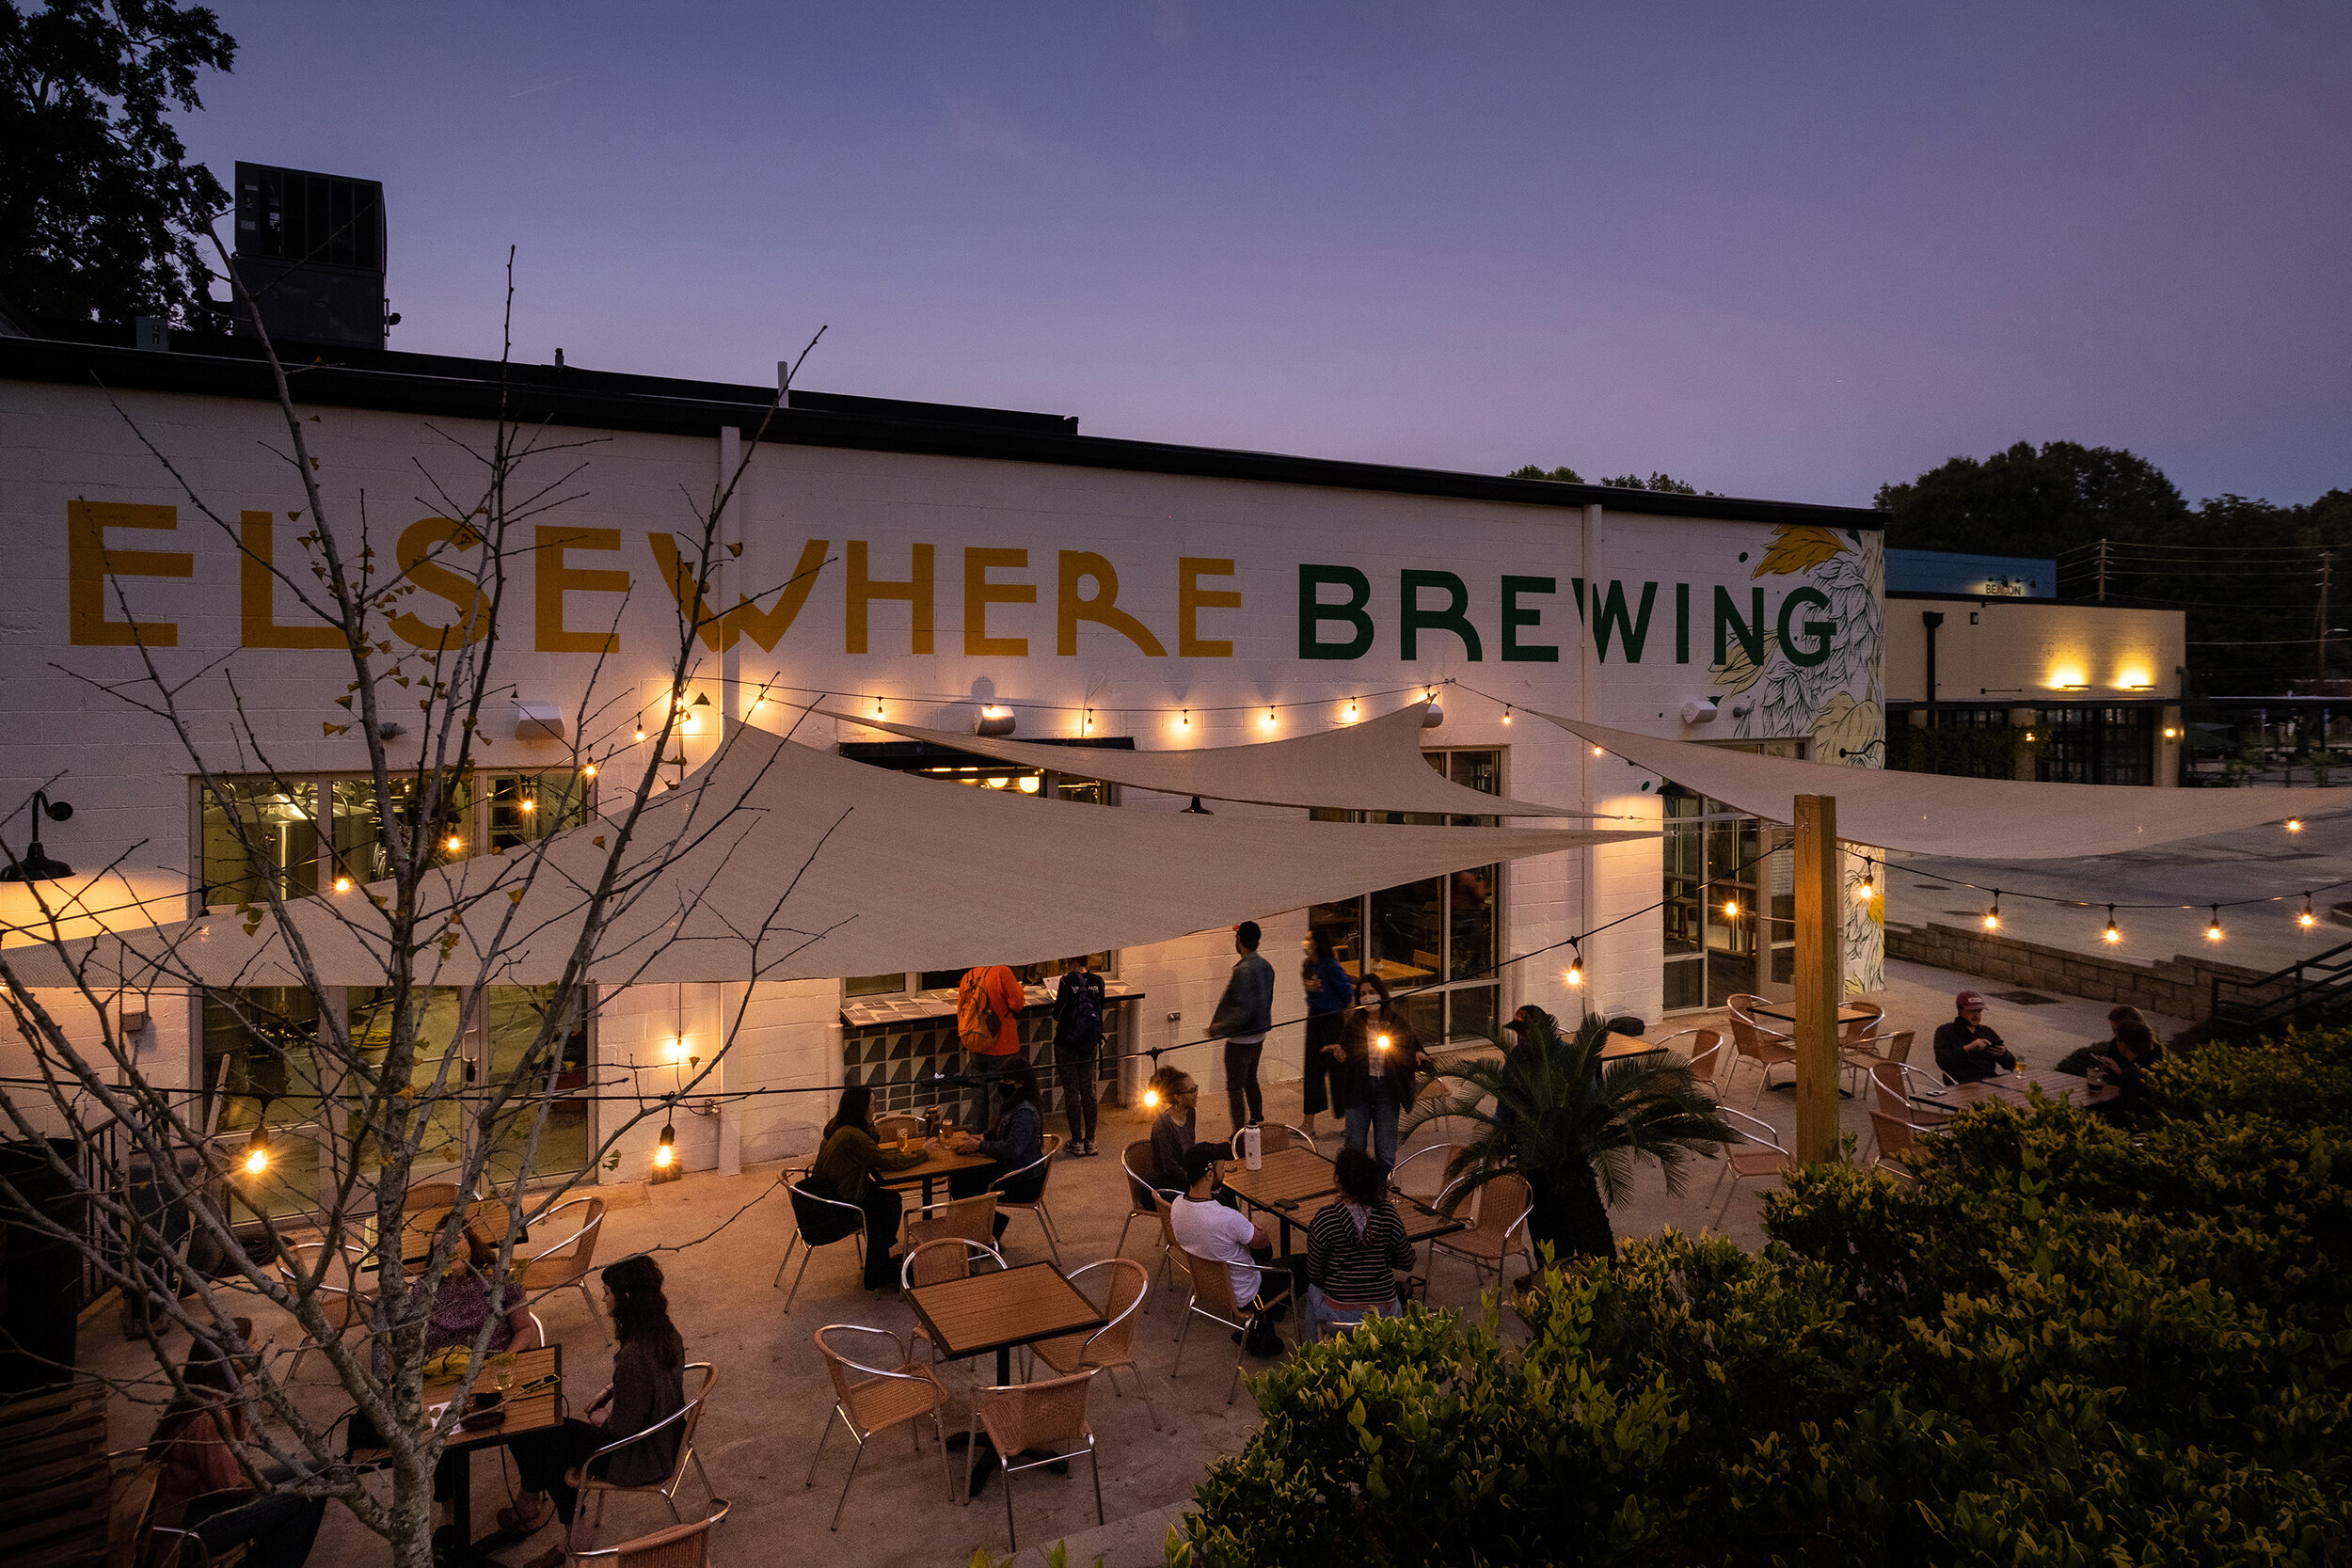  Elsewhere Brewing -  Local Architects  